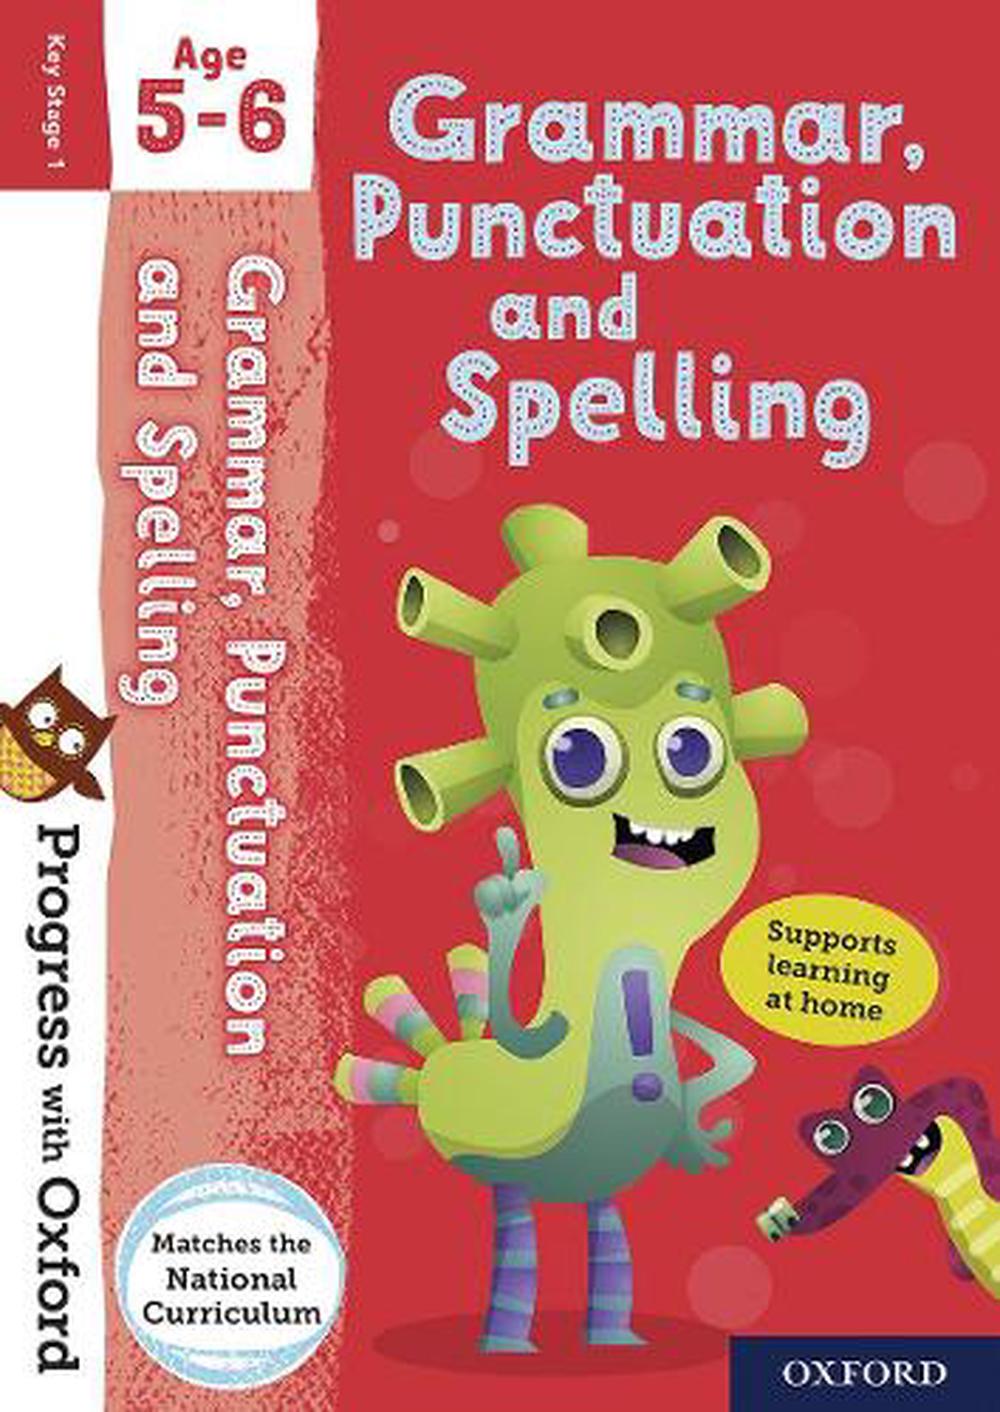 Progress with Oxford: Progress with Oxford: Grammar and Punctuation Age  5-6- Practise for School with Essential English Skills by Jenny Roberts,  Book & Merchandise, 9780192767844